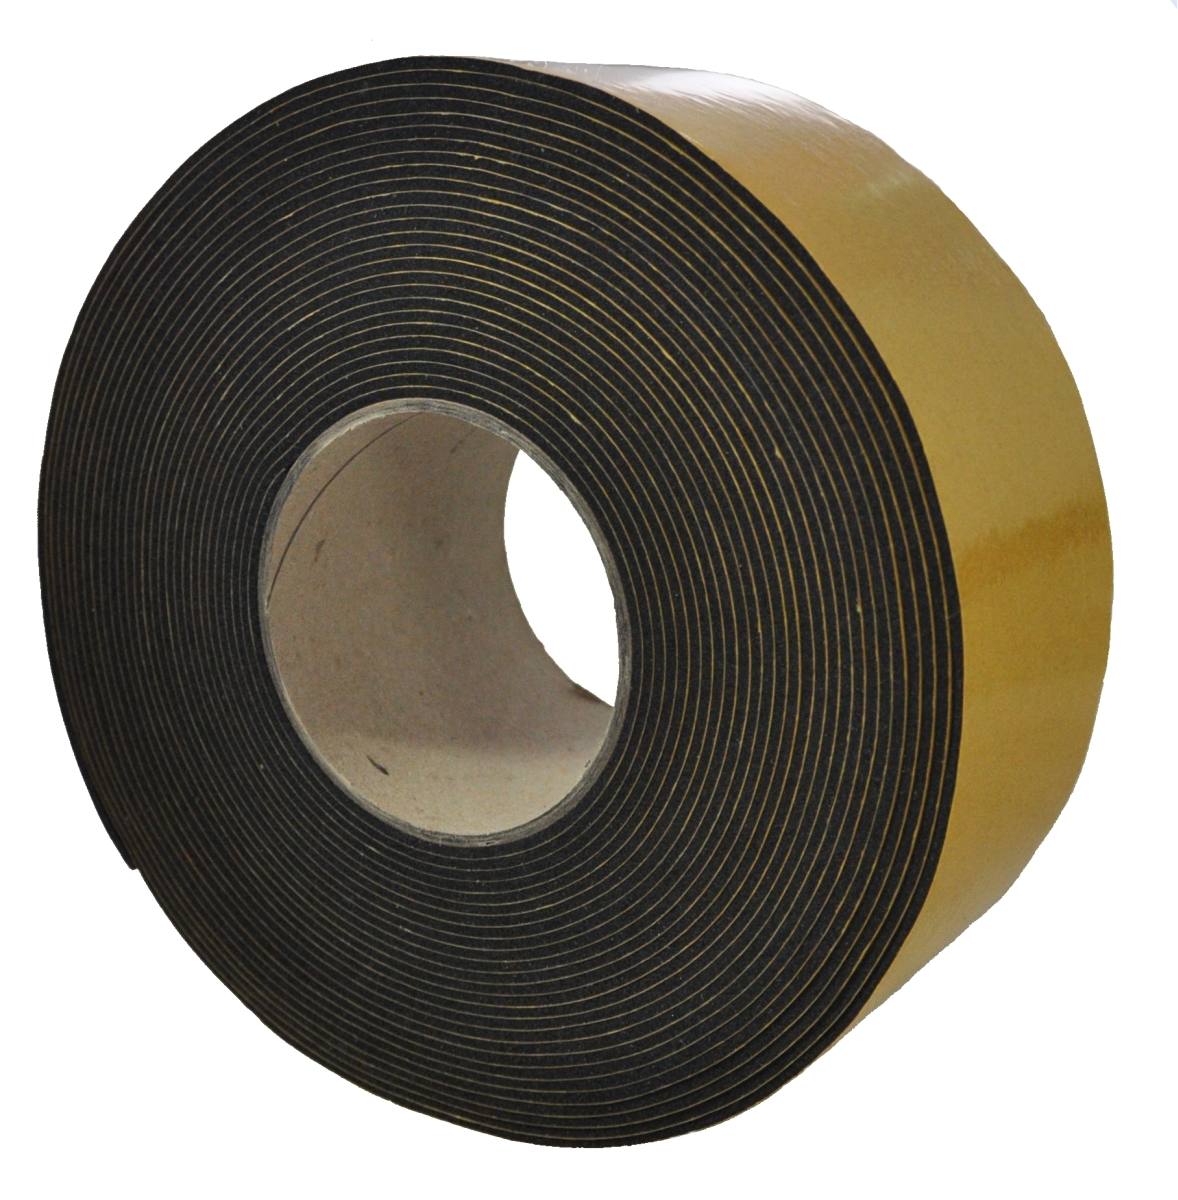 S-K-S EPDM 1mmx38mmx10m black self-adhesive on one side